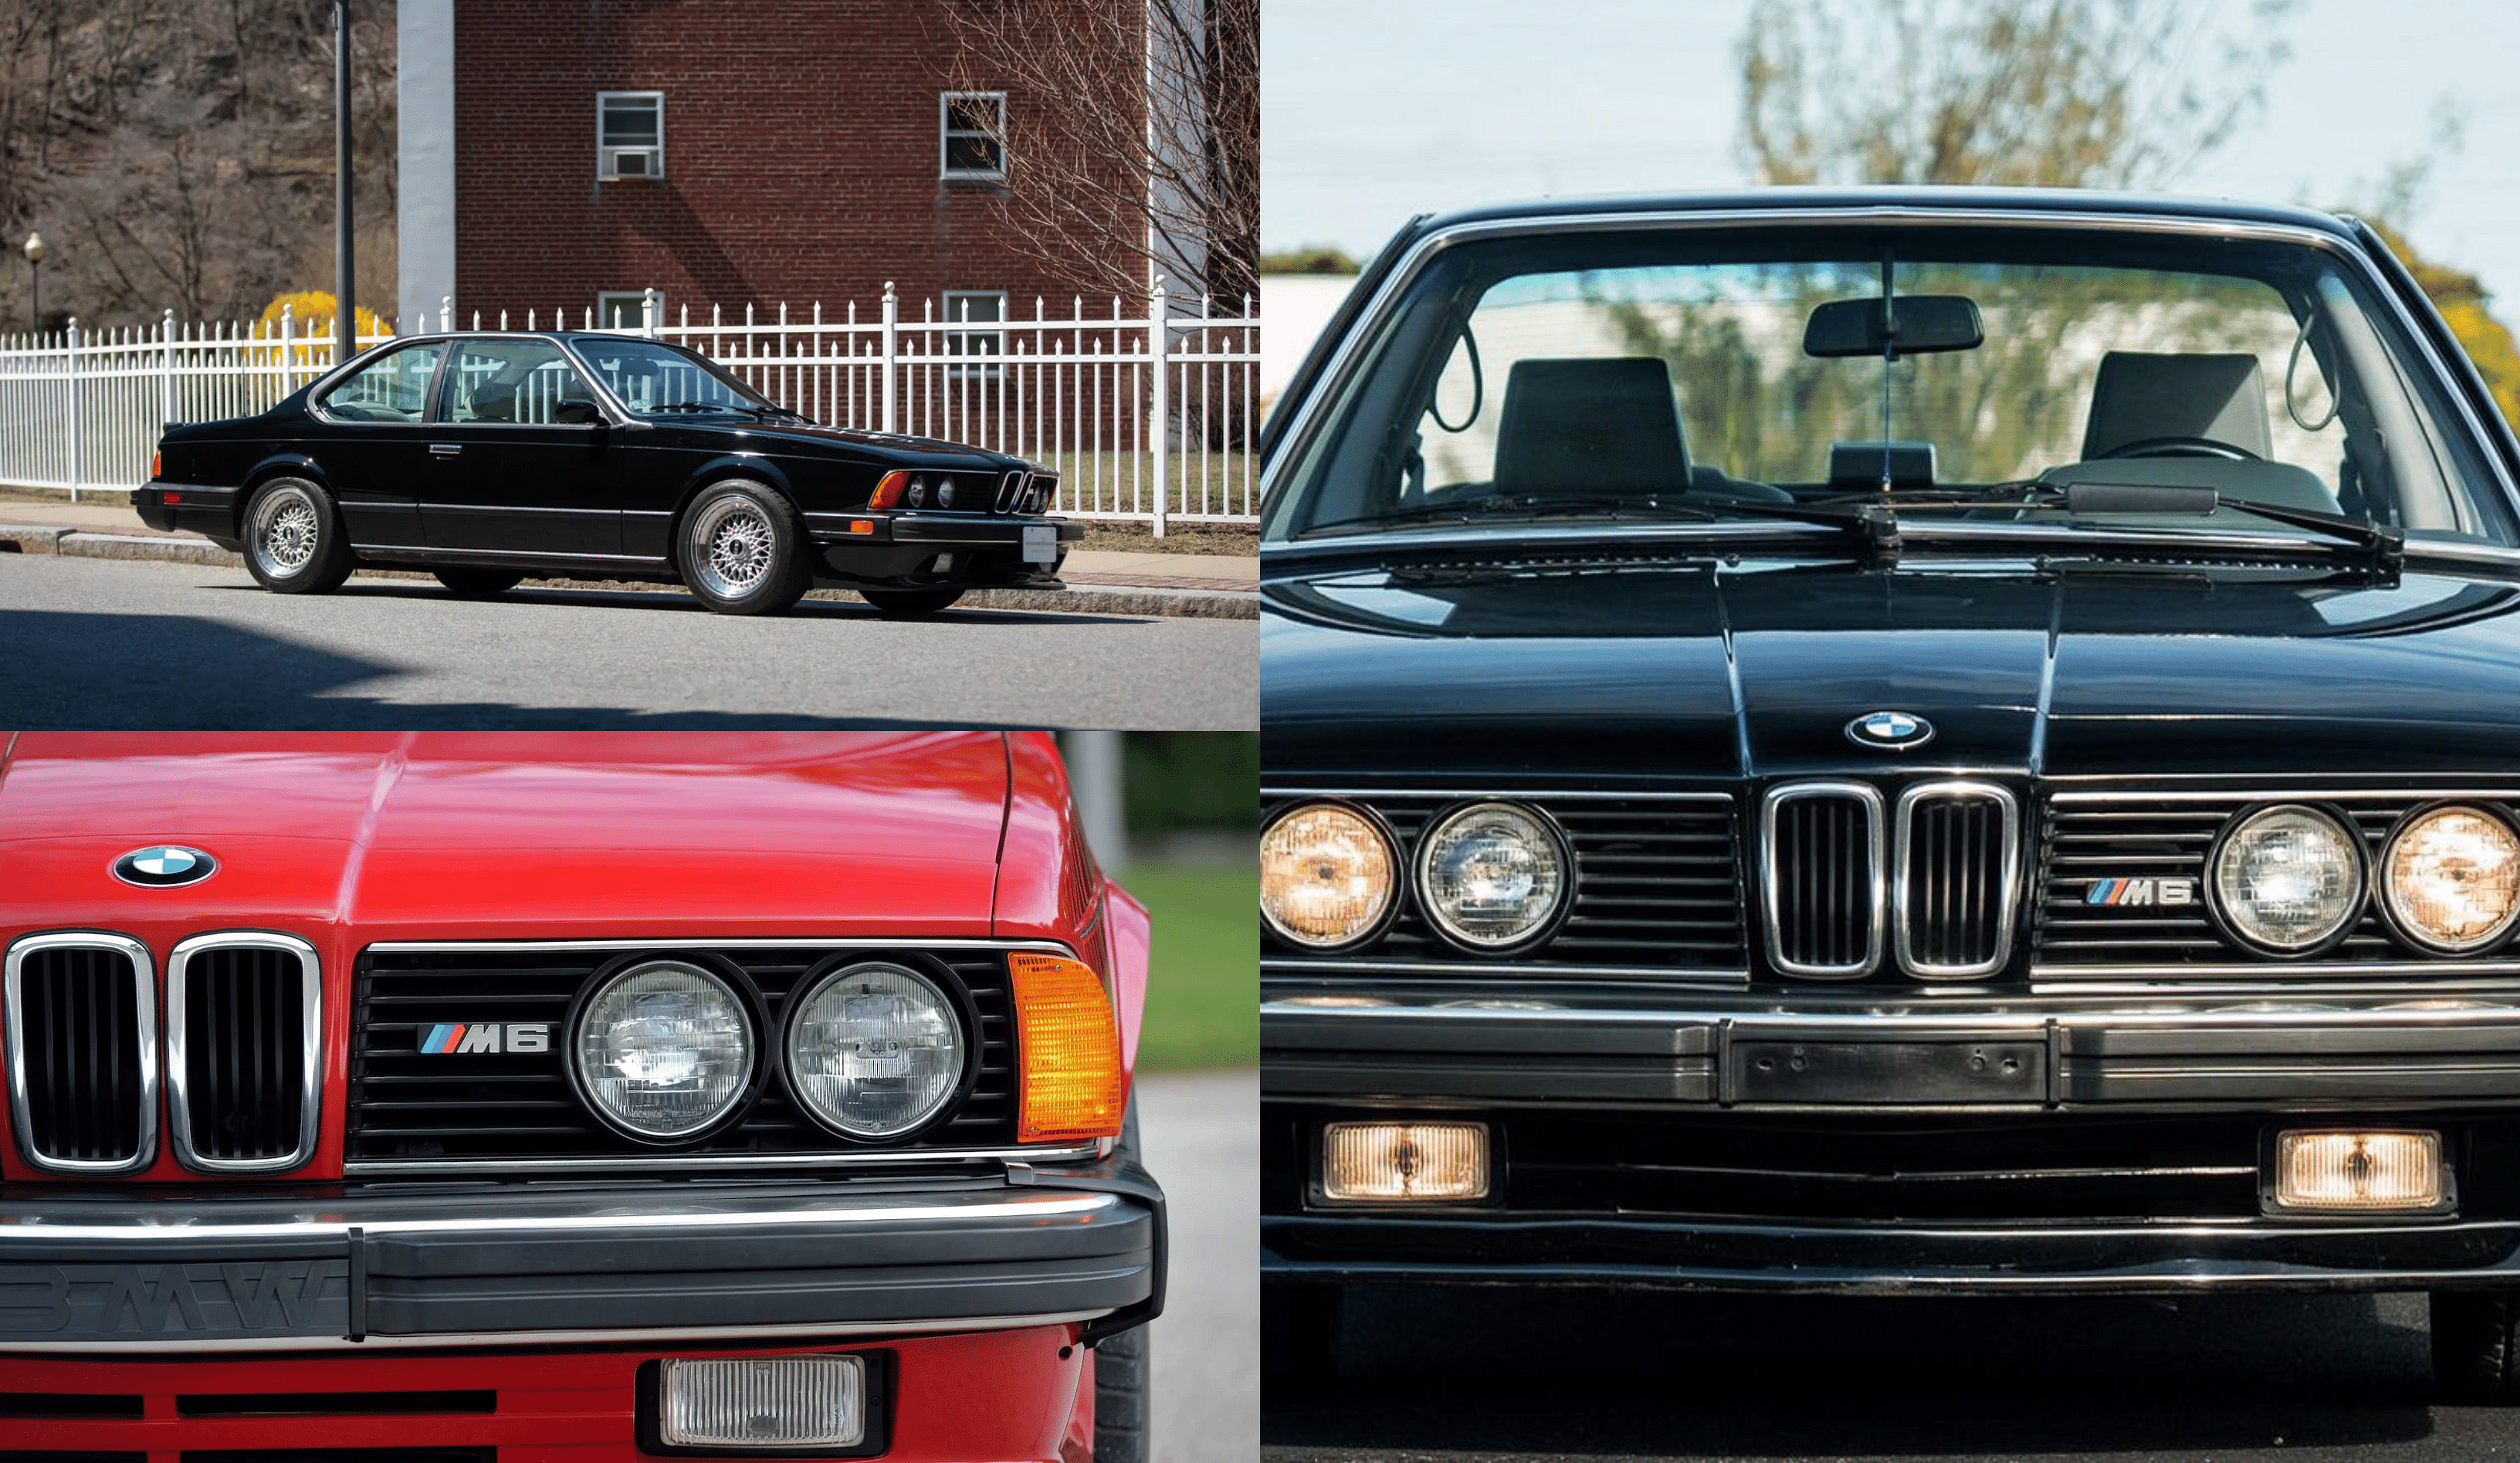 BMW E24 M6 front view, side view